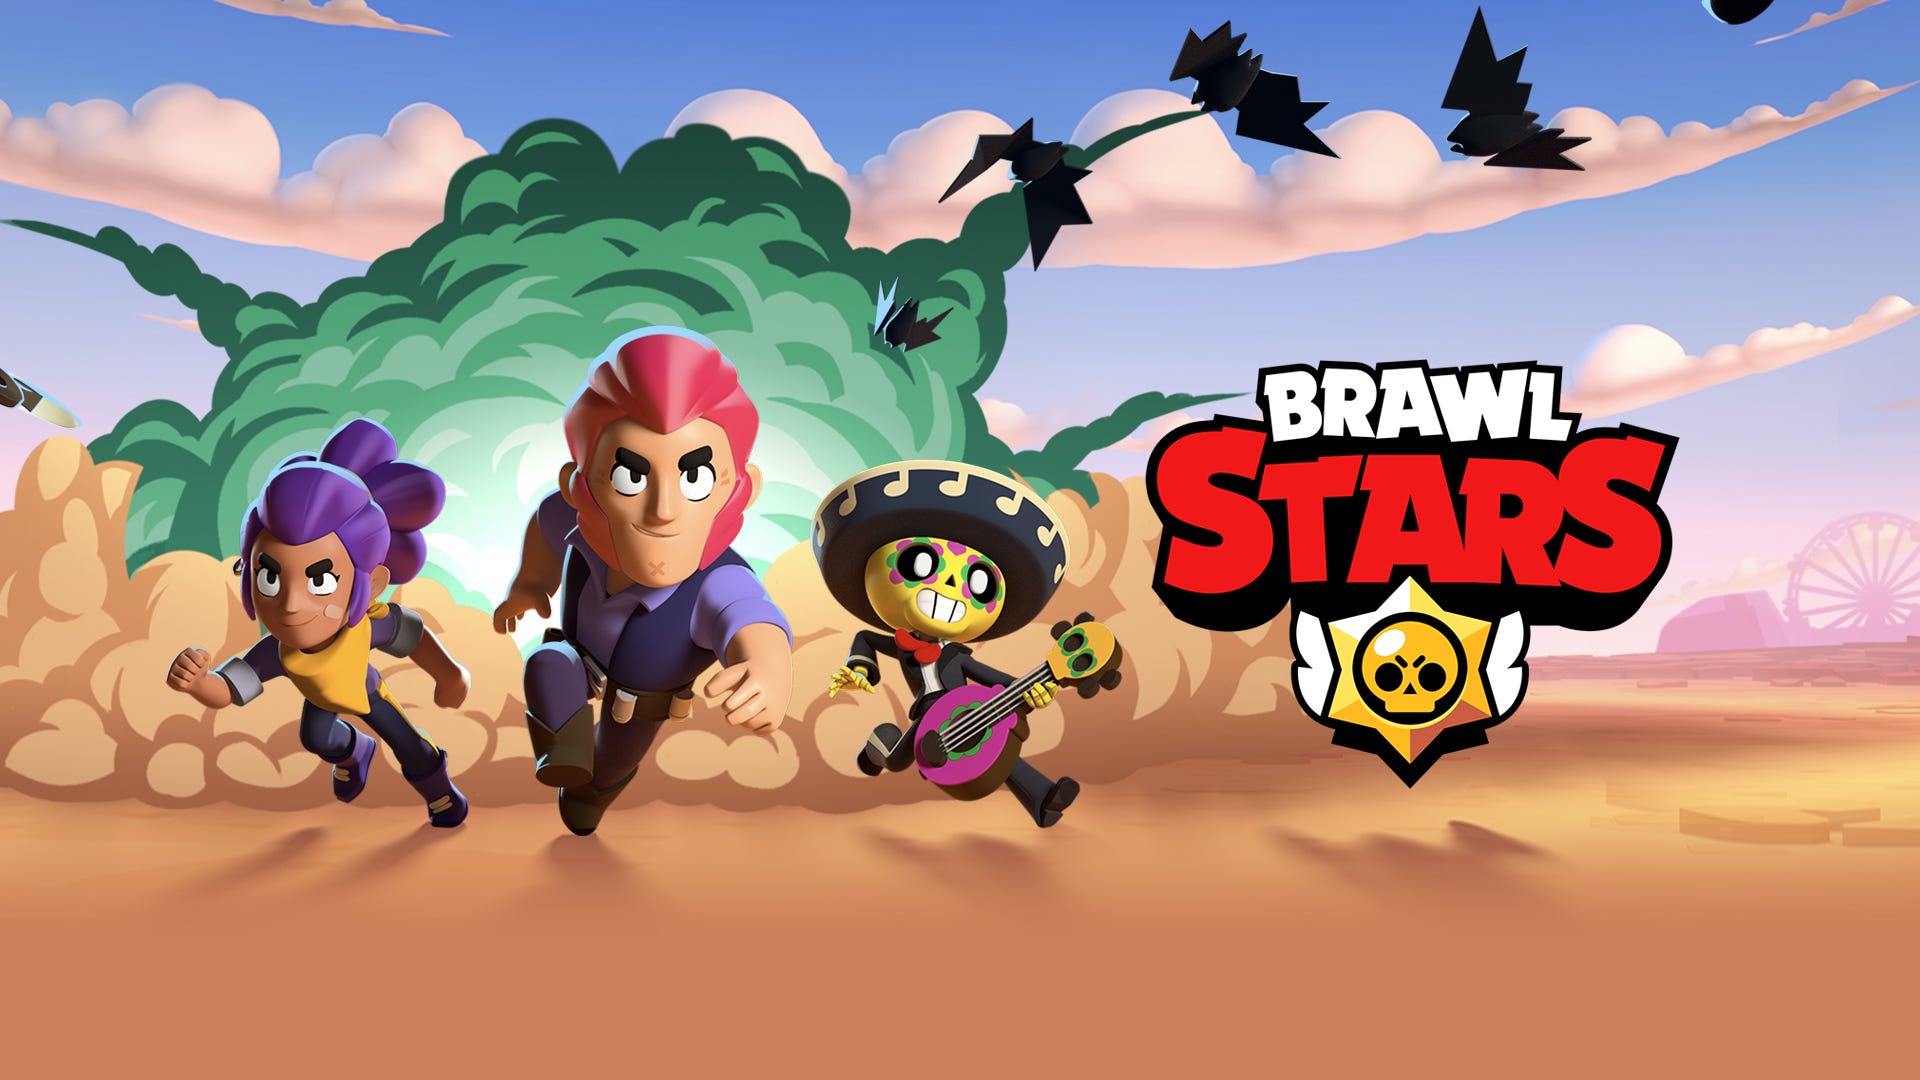 Brawl Stars Is It Balanced Brawl Stars Is A Mobile Game Developed By Siddharth Kapoor Game Design Fundamentals Medium - how to change club name in brawl stars